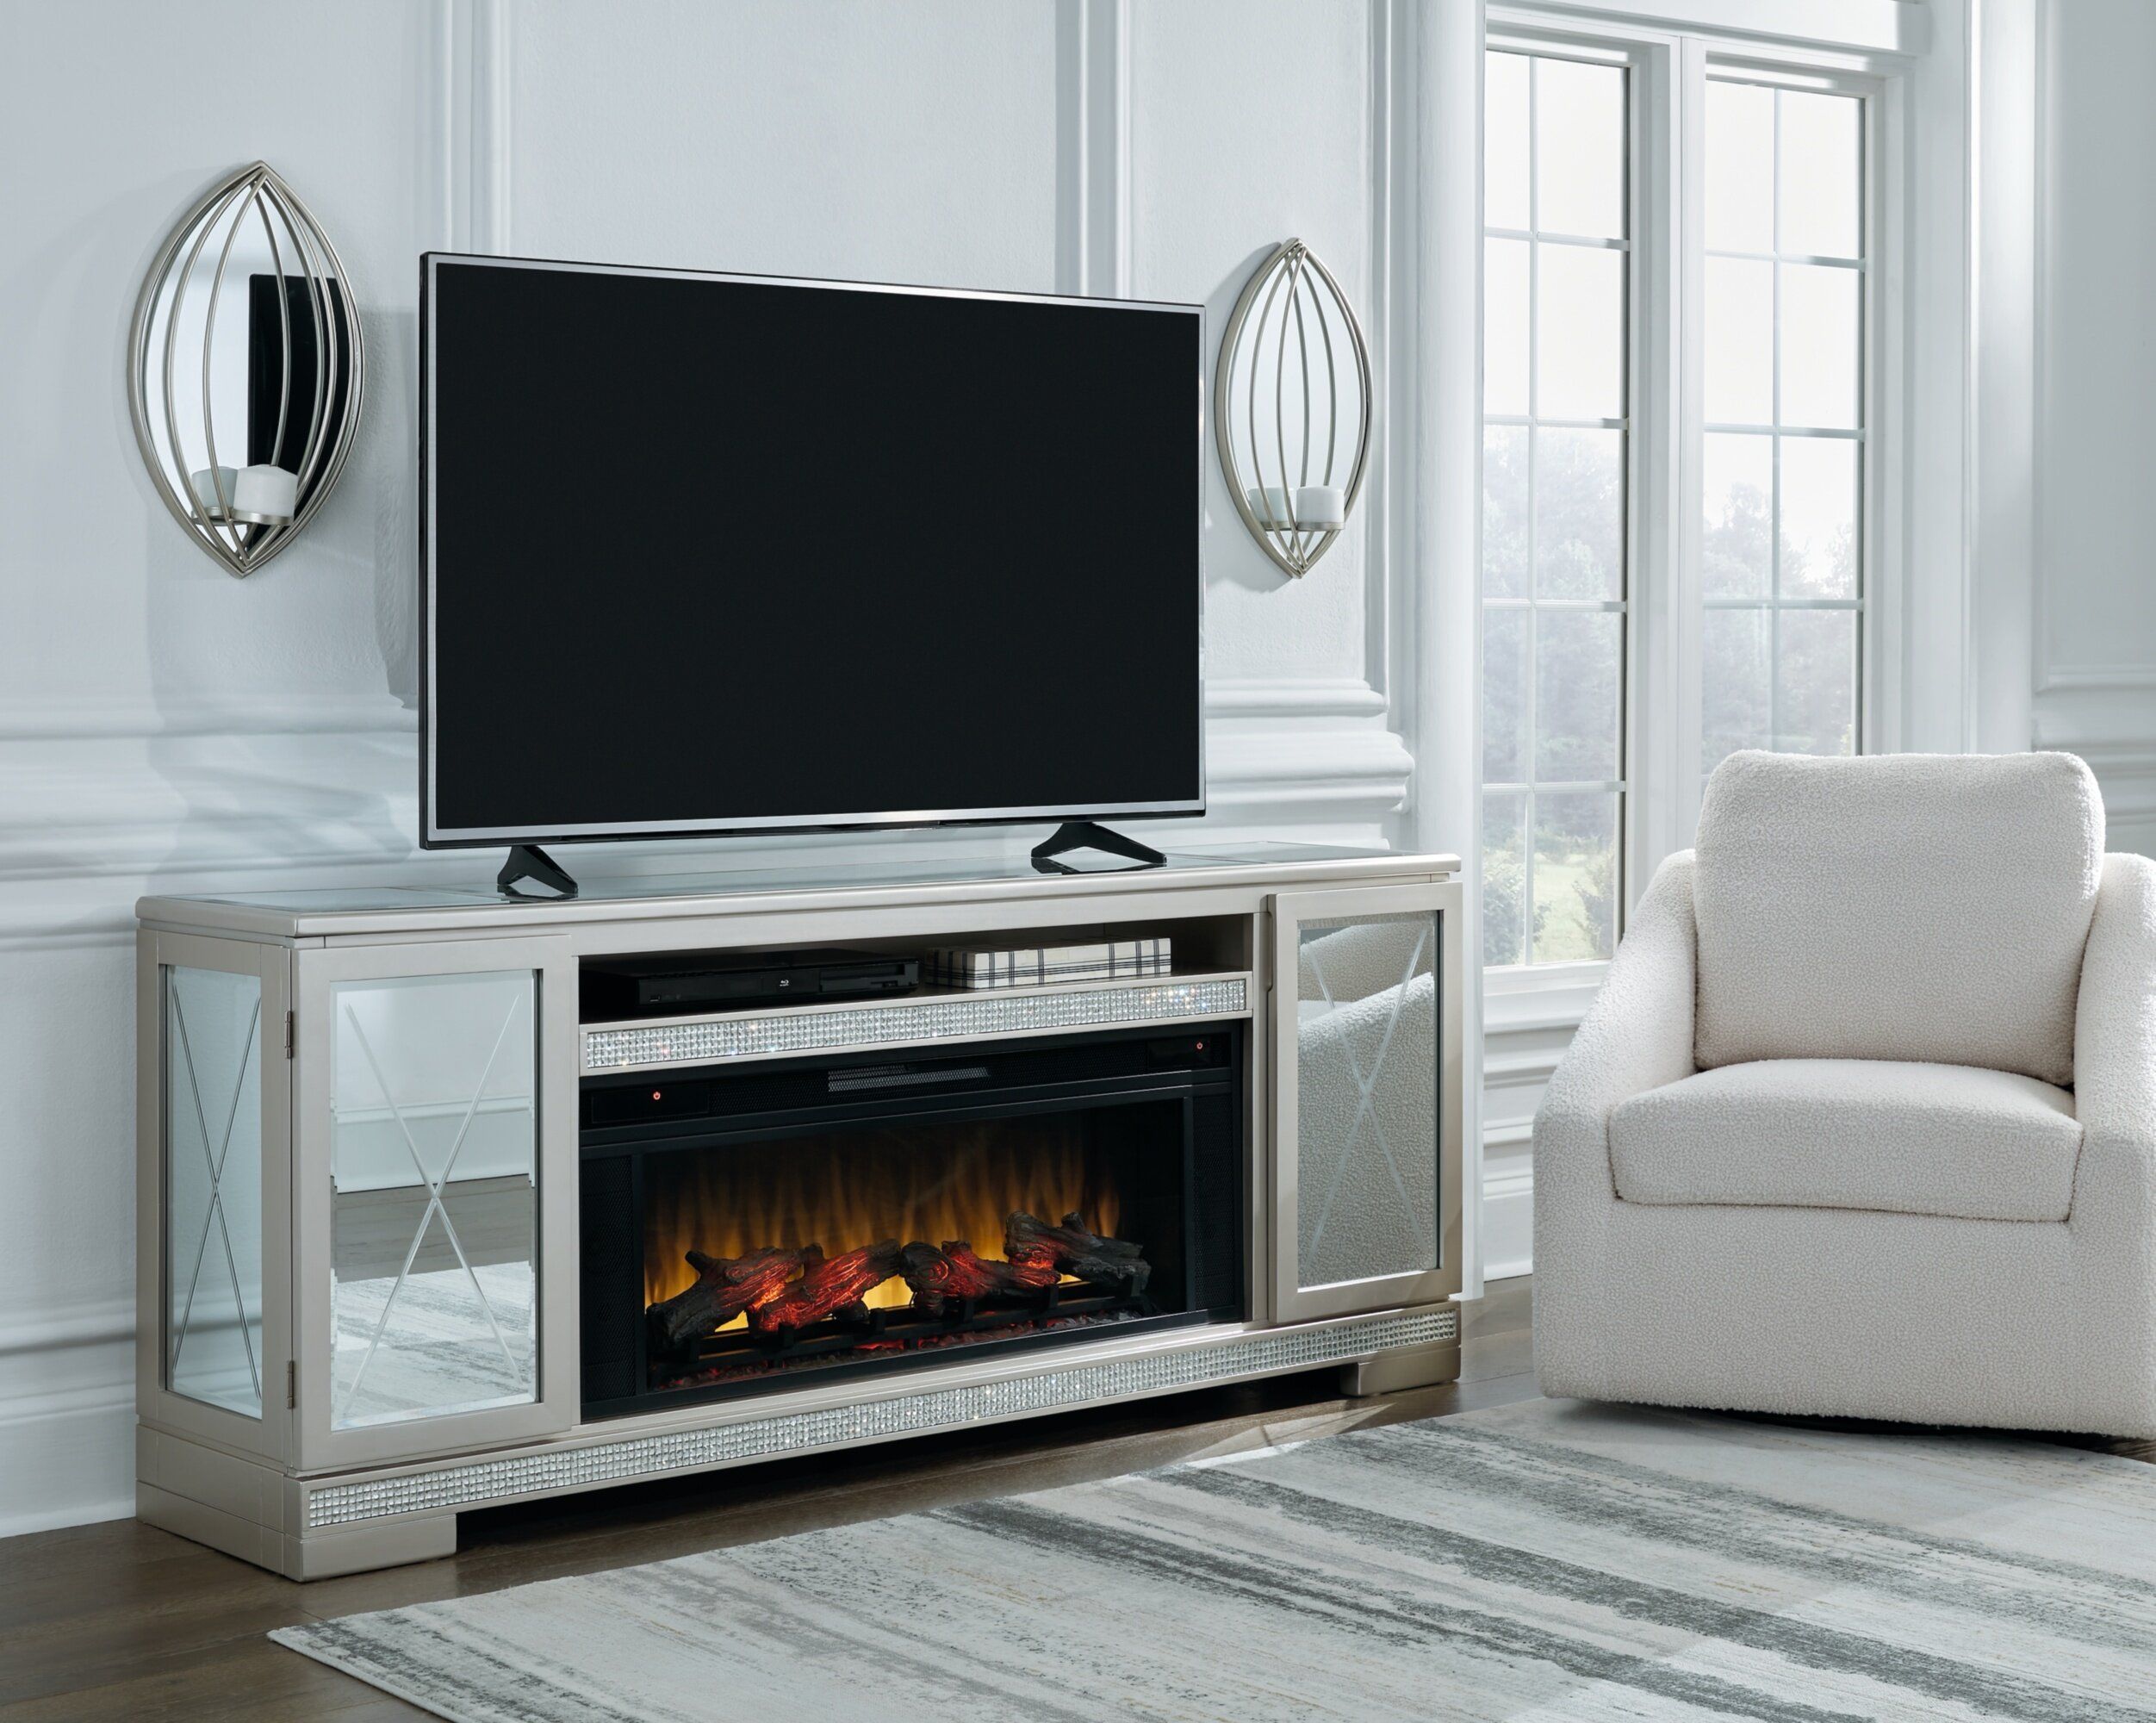 Signature Designashley Flamory Tv Stand For Tvs Up To 70" With Electric  Fireplace Included | Wayfair Within Electric Fireplace Tv Stands (View 10 of 15)